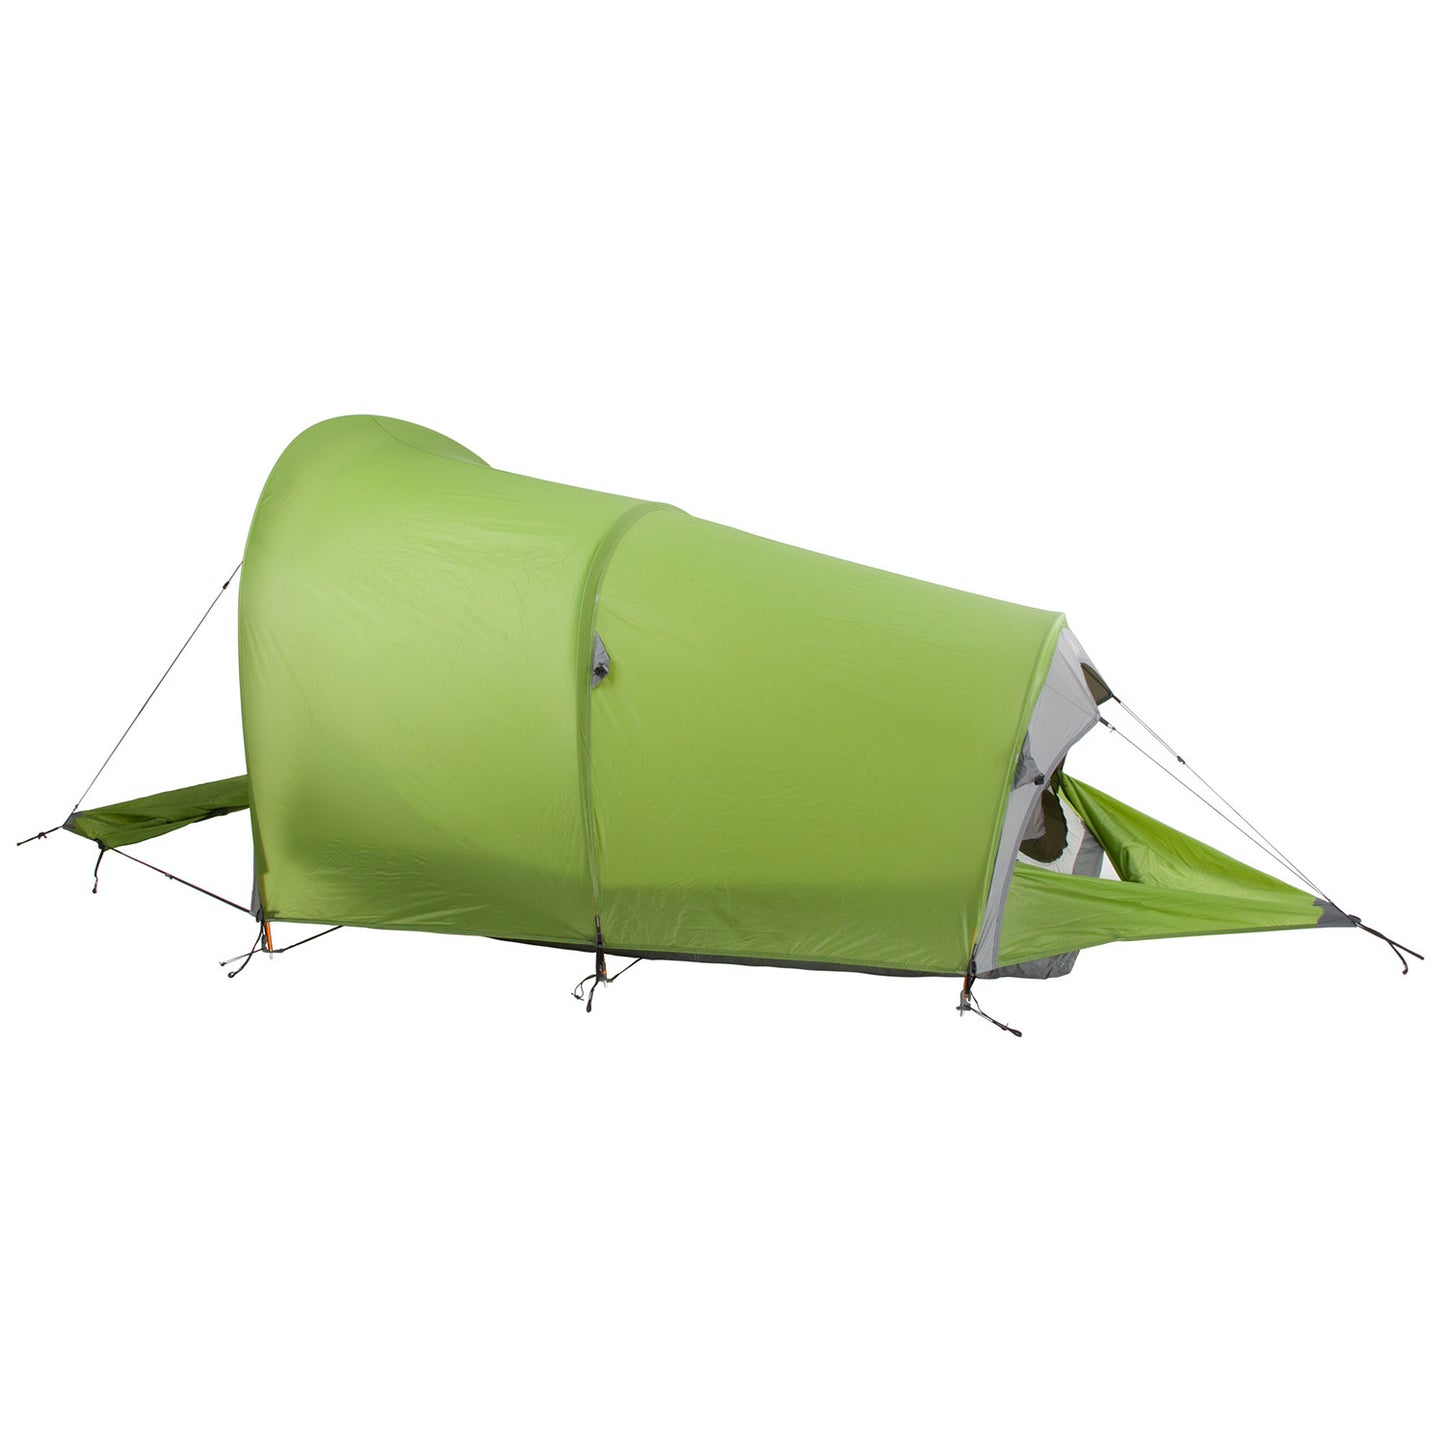 Tunnel tent rear vent